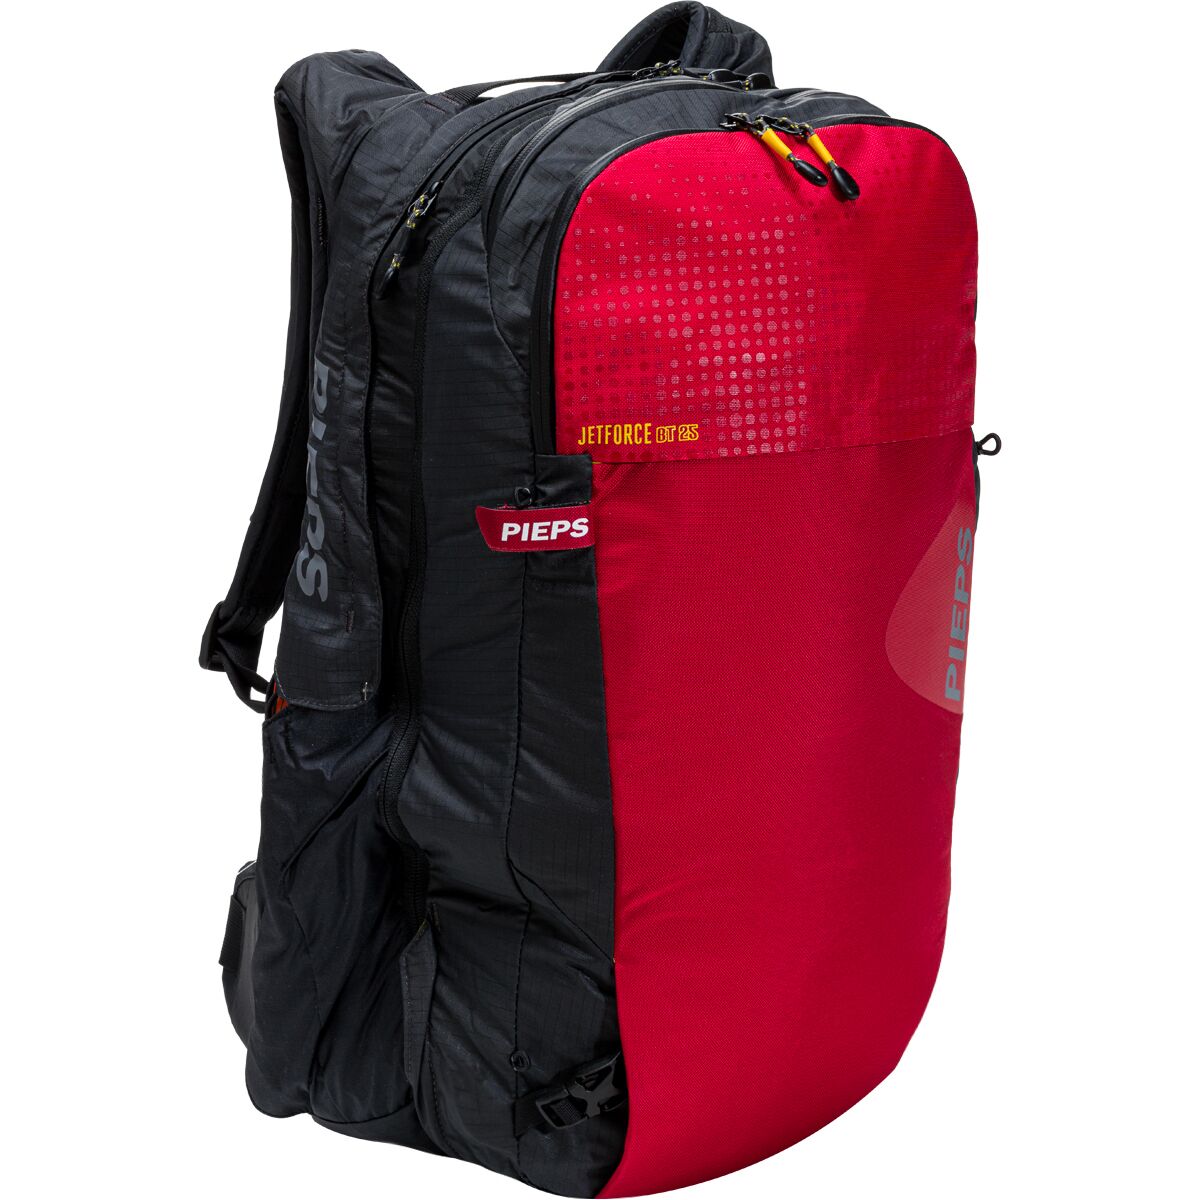 Pieps Jetforce BT 25L Avalanche Airbag Backpack Chili Red